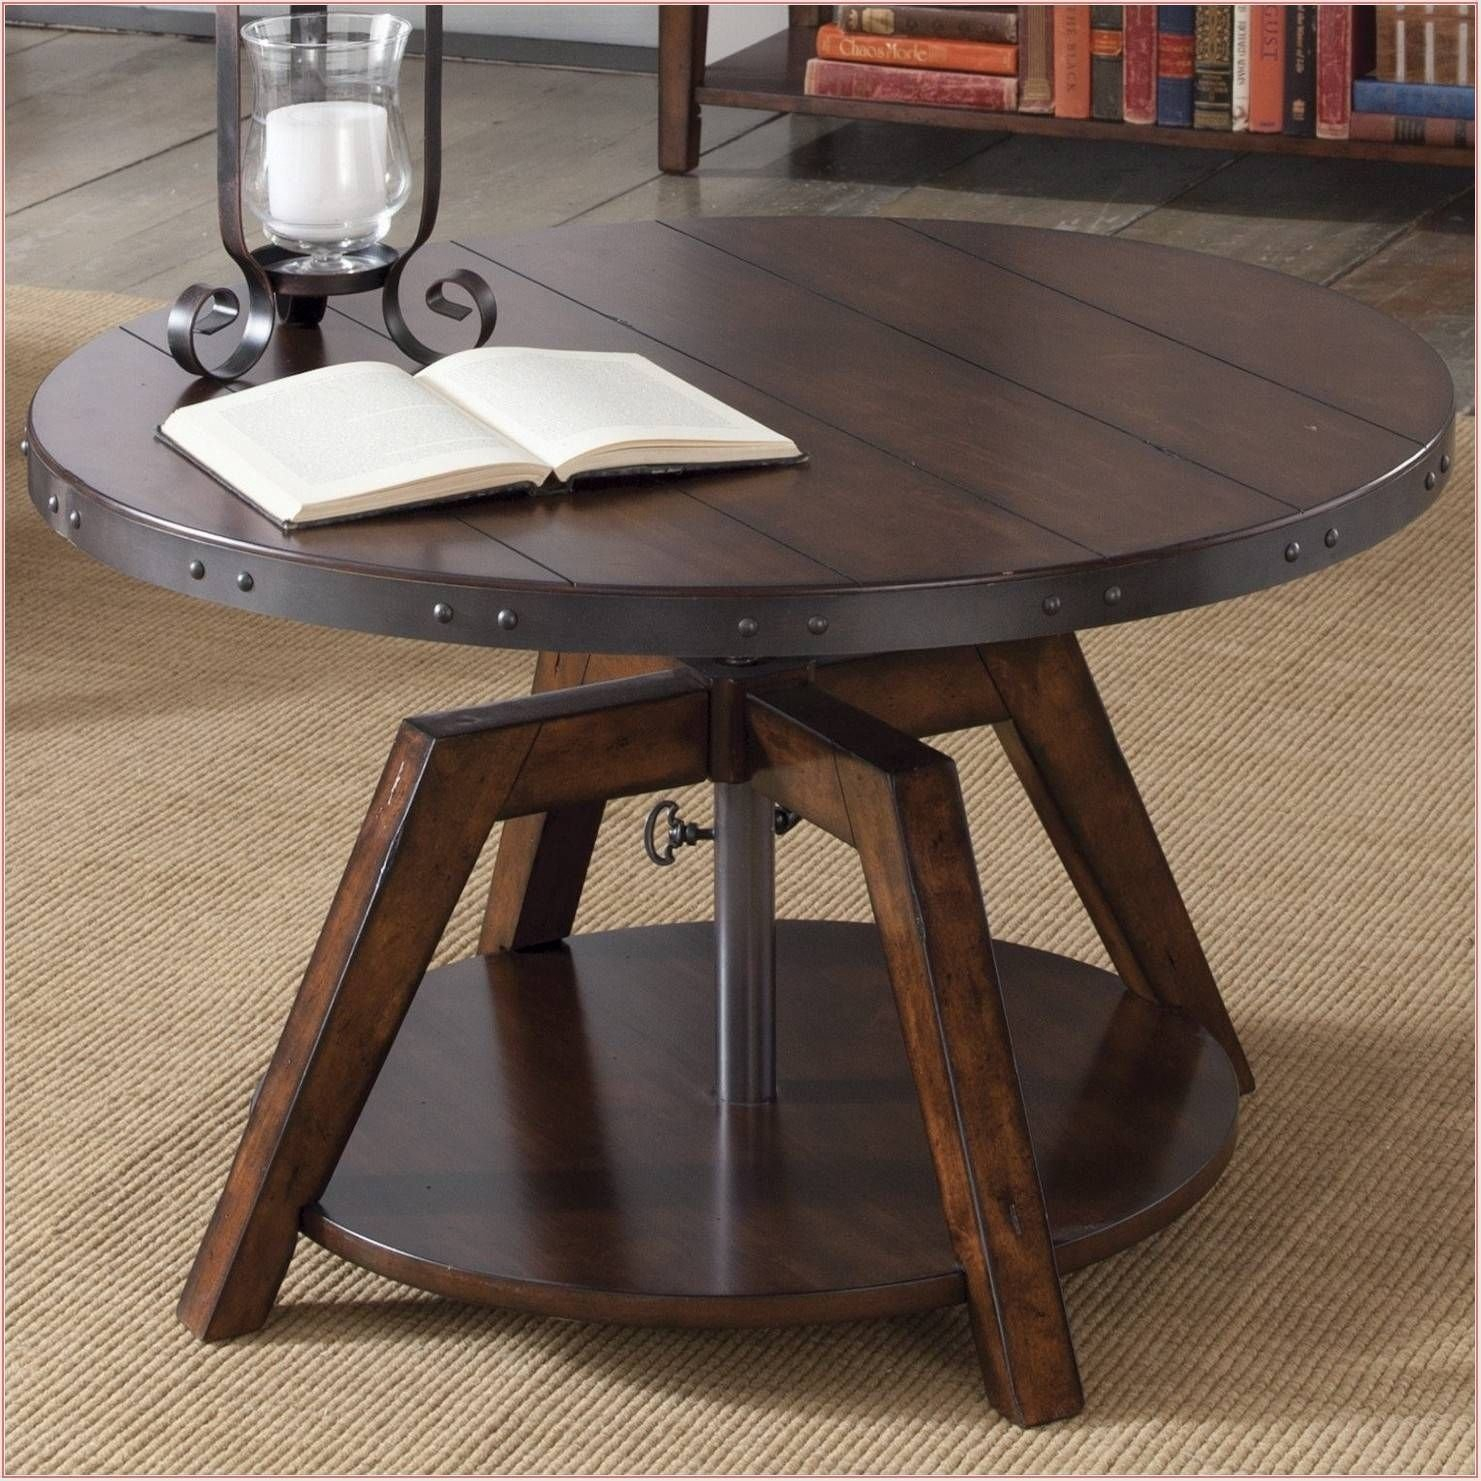 50 Amazing Convertible Coffee Table To Dining Table Up To 70 Off inside measurements 1481 X 1481